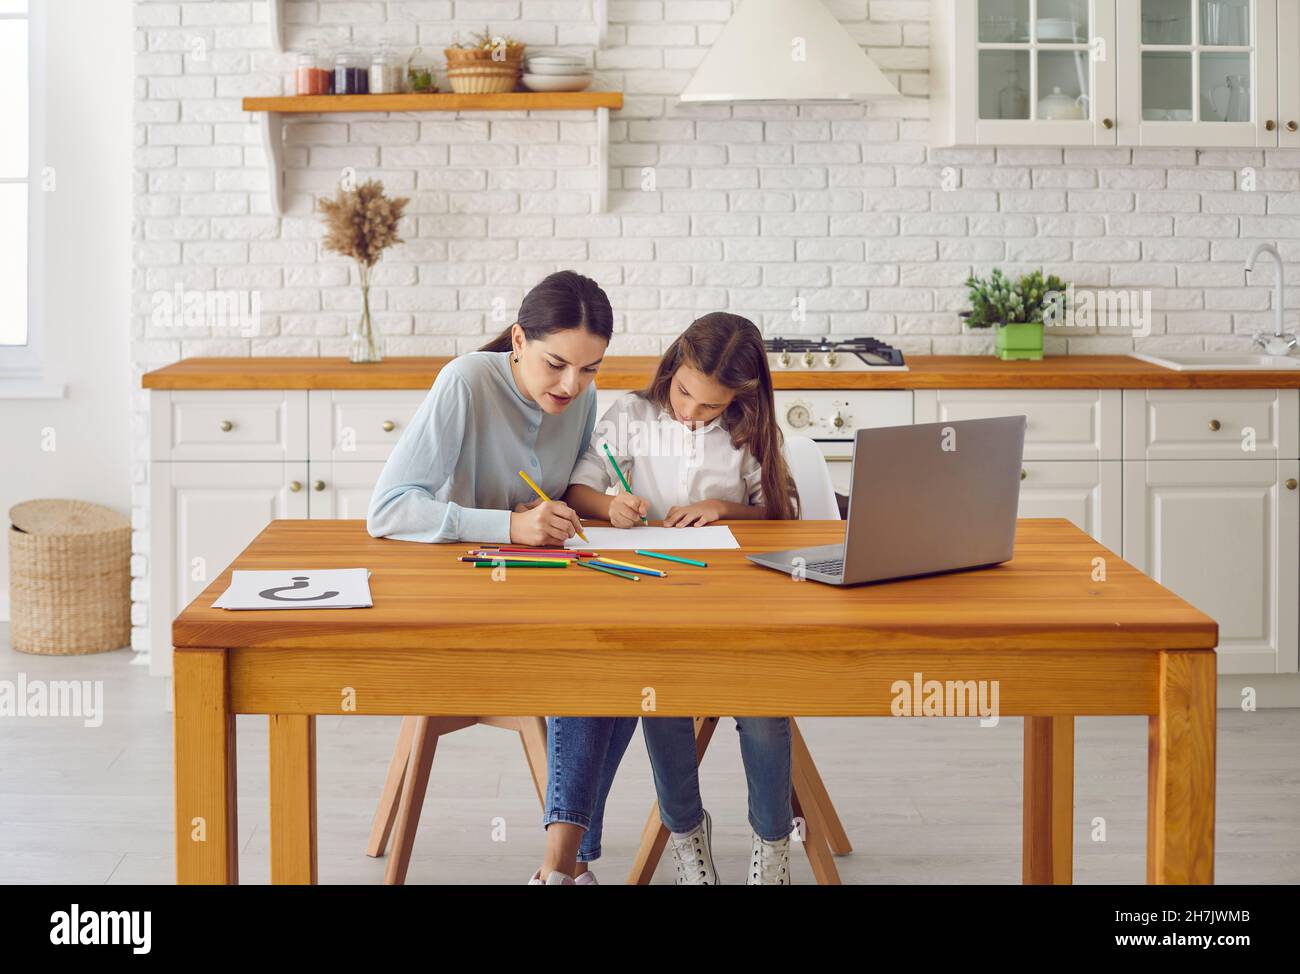 Professional female psychologist talks and draws with teenage girl during session. Stock Photo